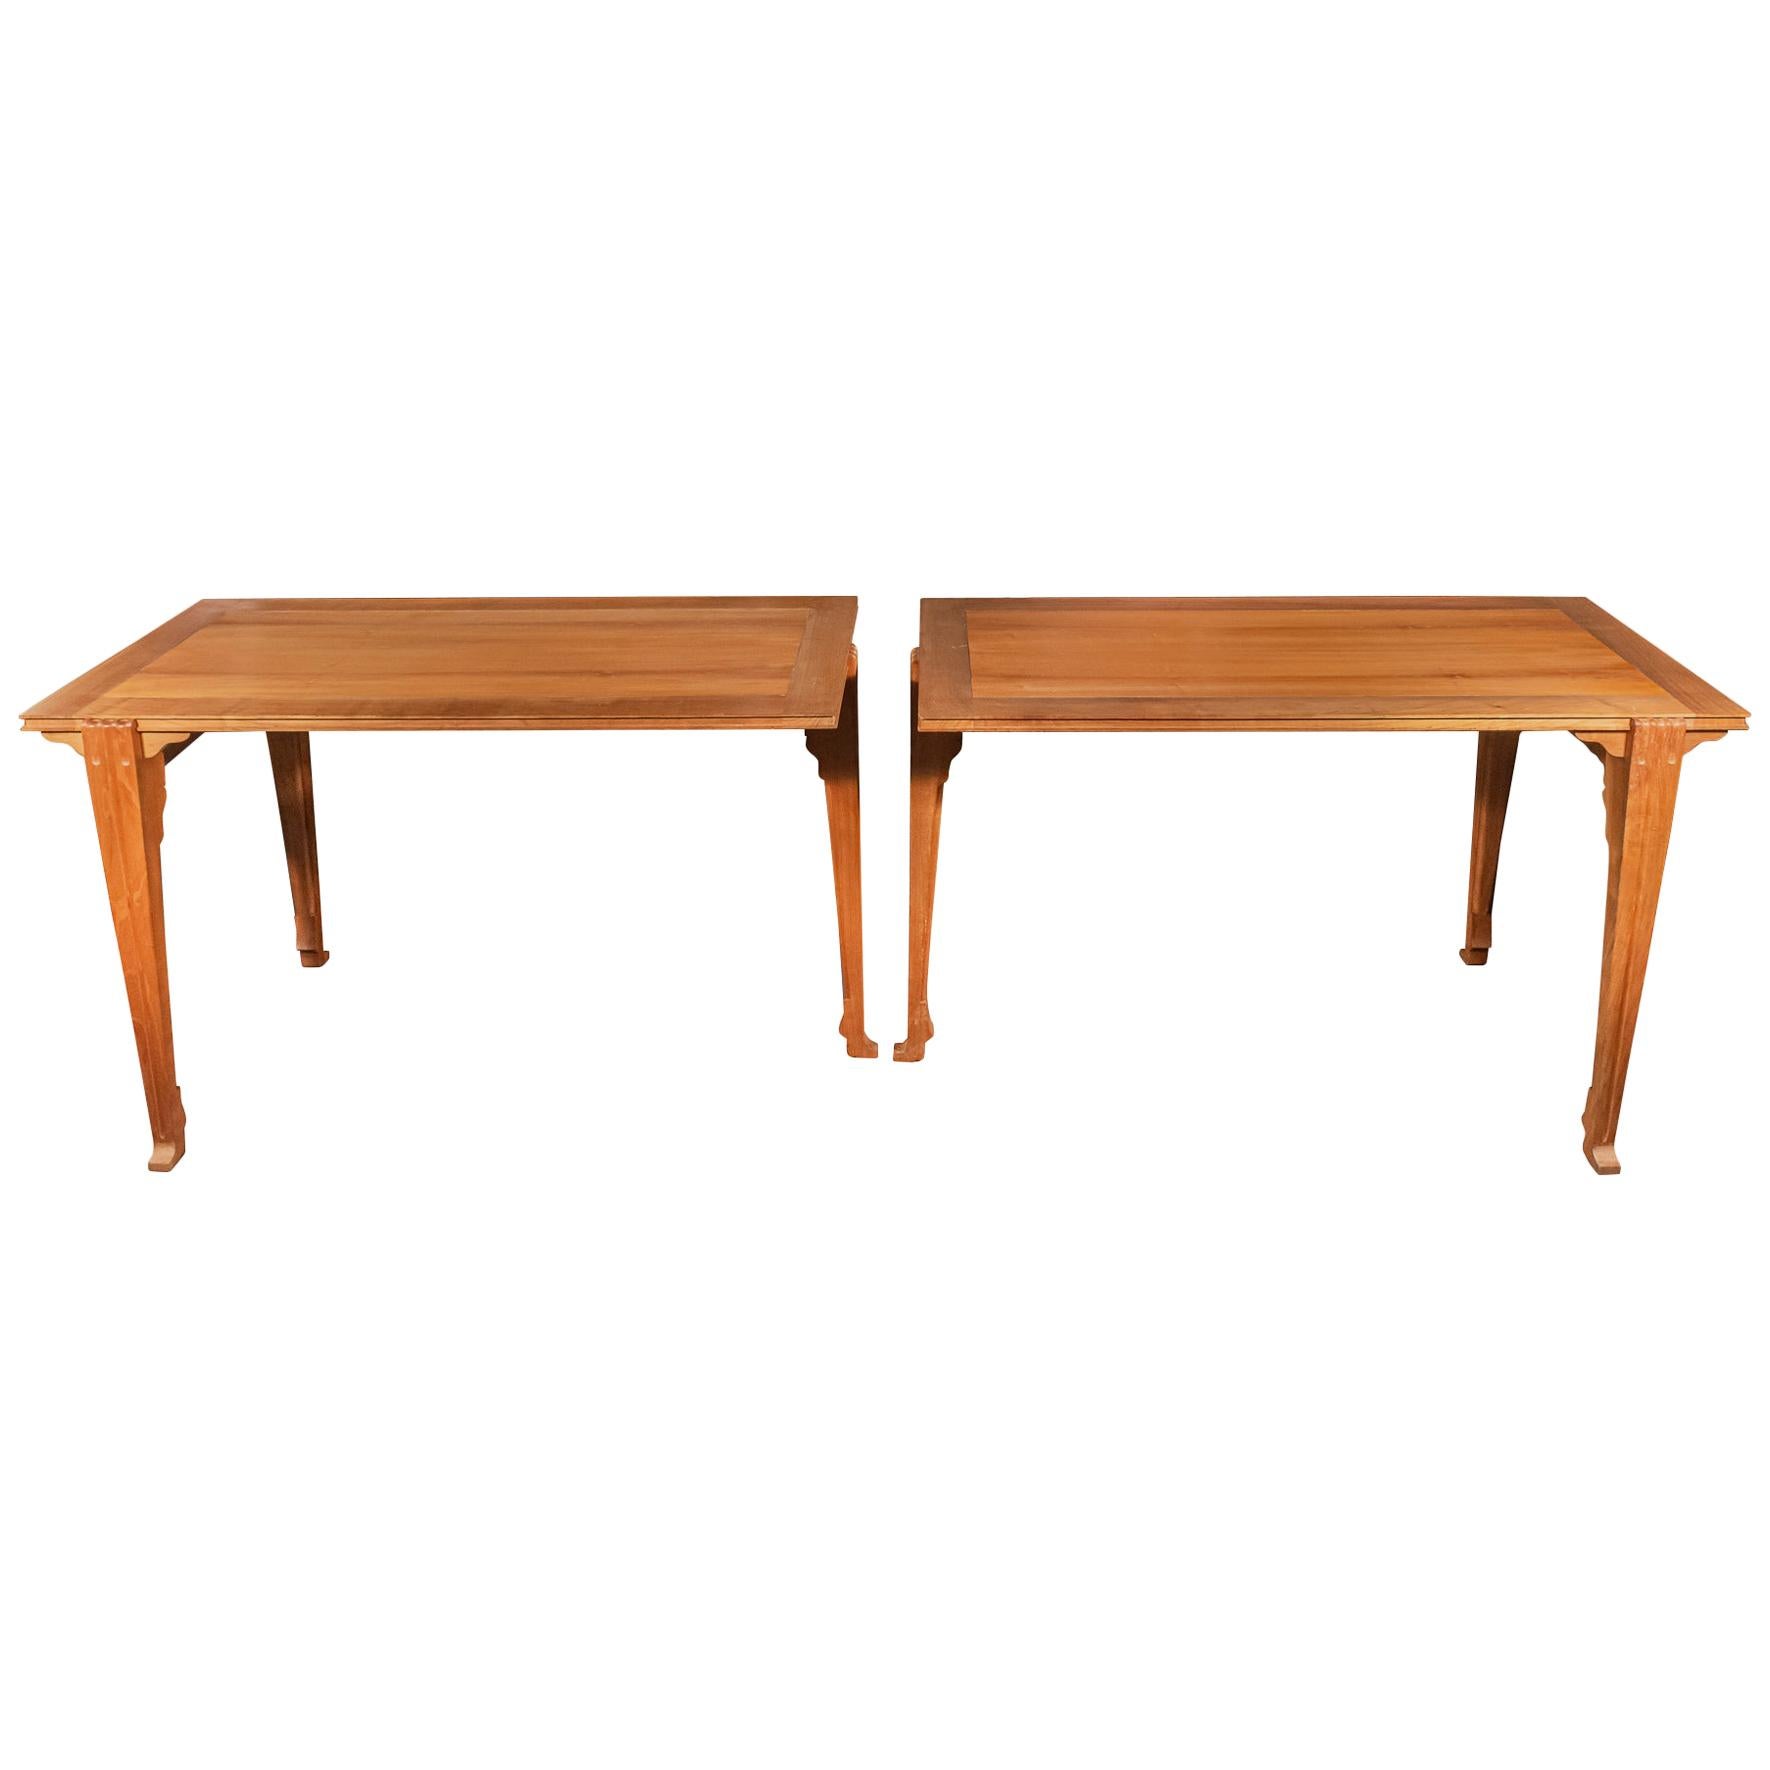 "Kerylos", Pair of Tables, in the Style of Emmanuel Pontremoli, circa 1970